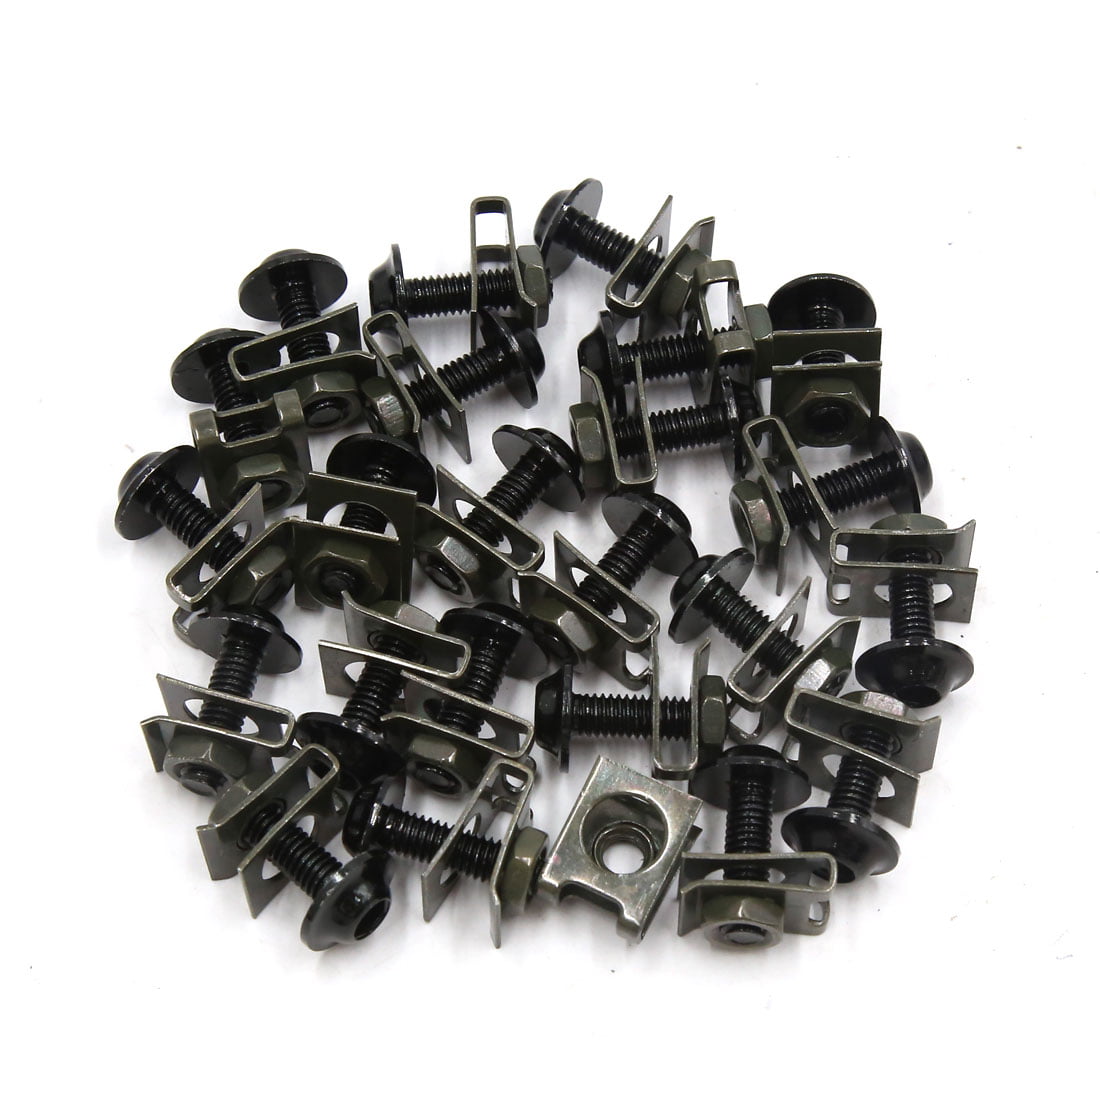 Colorful Motorcycle Sportbike Windscreen Fairing Bolts Kit Fastener Clips Screws